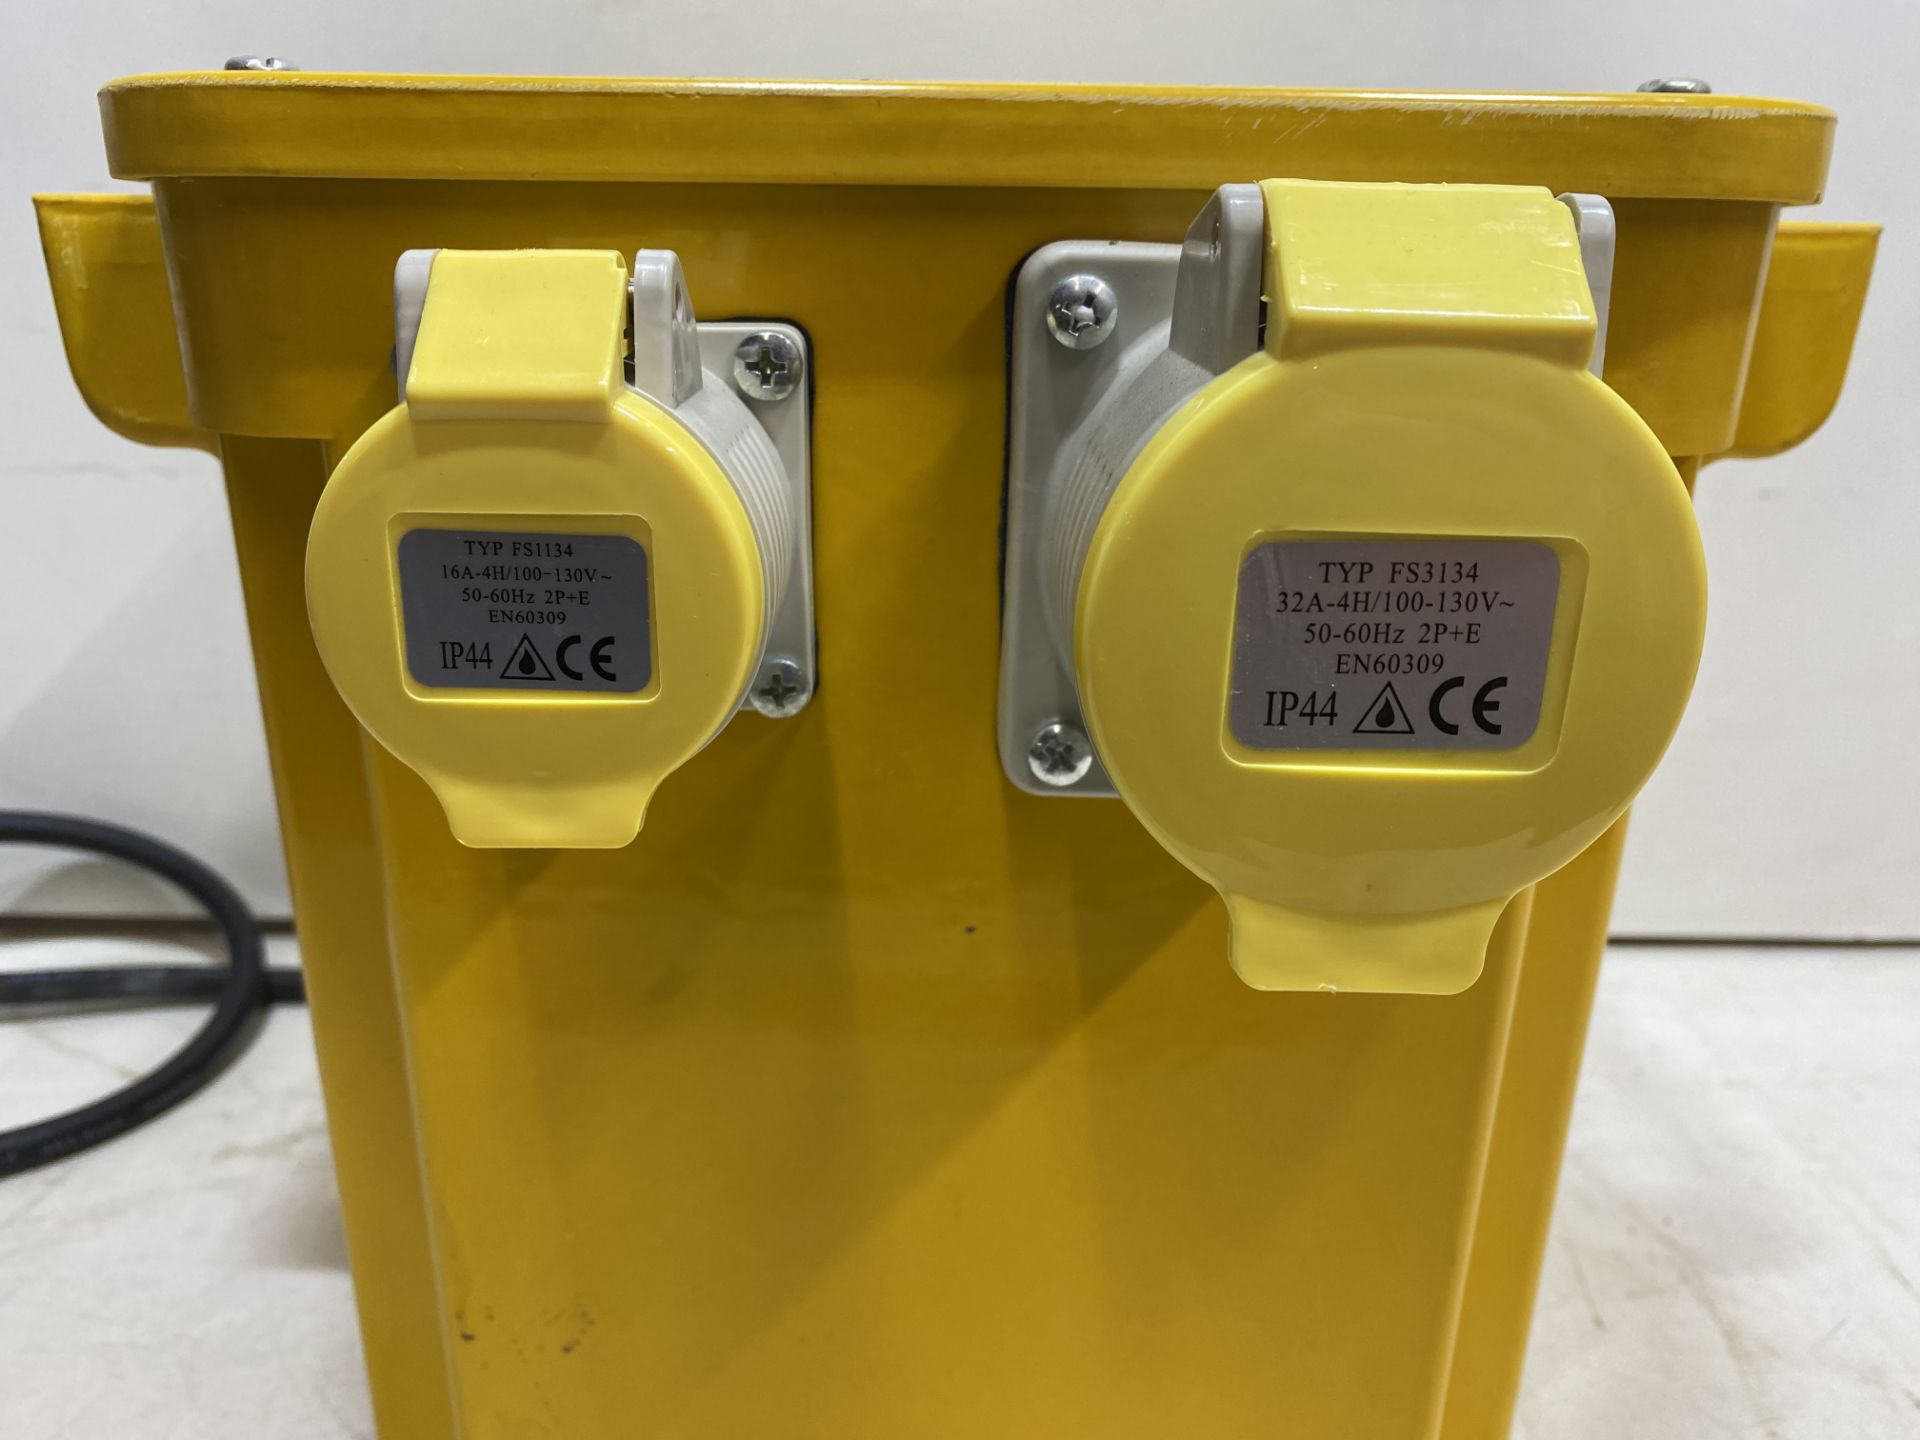 4 x MCG Industrial CM2503/CL 5.0kva Single Phase 110v Portable Transformers - Image 6 of 12